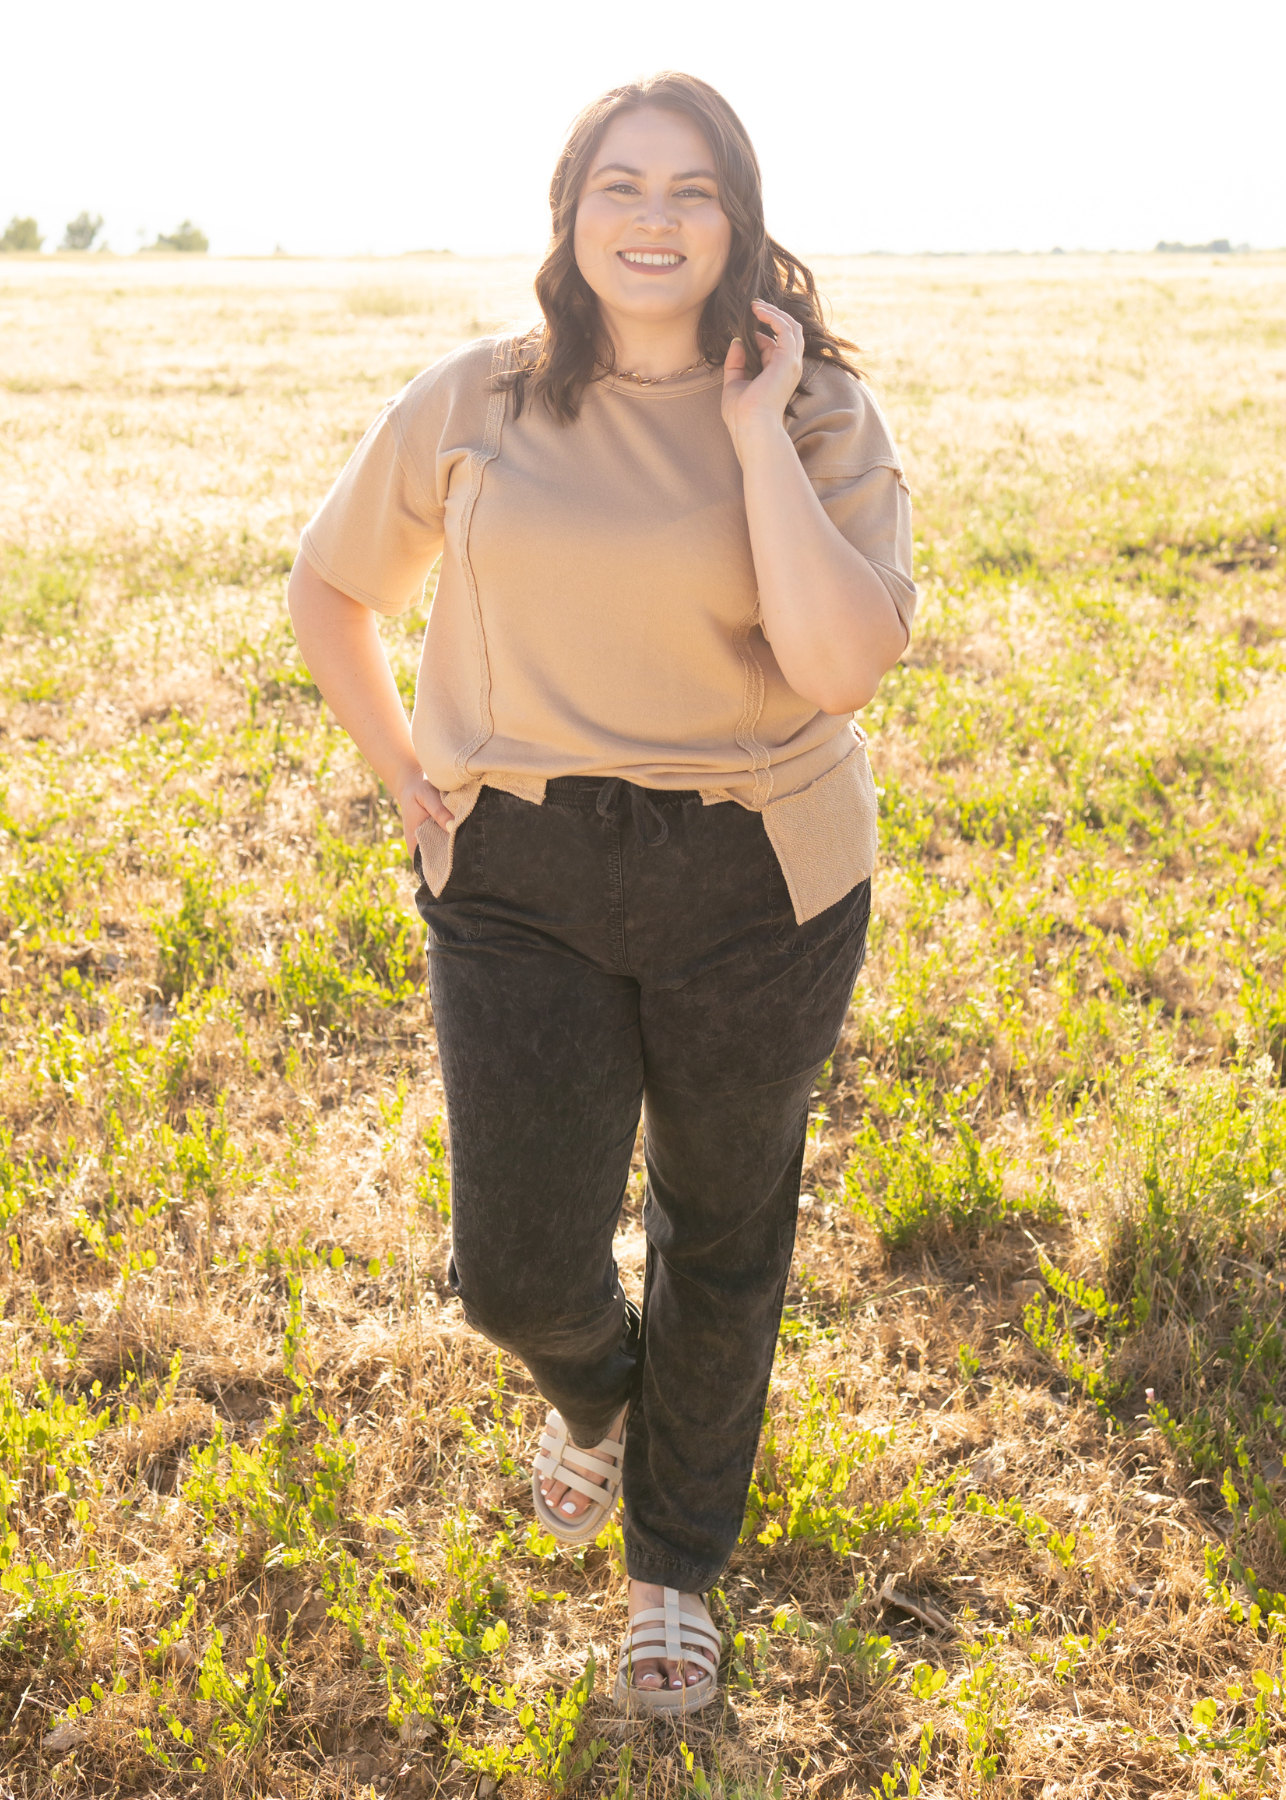 Short sleeve plus size taupe top with black pants sold separately